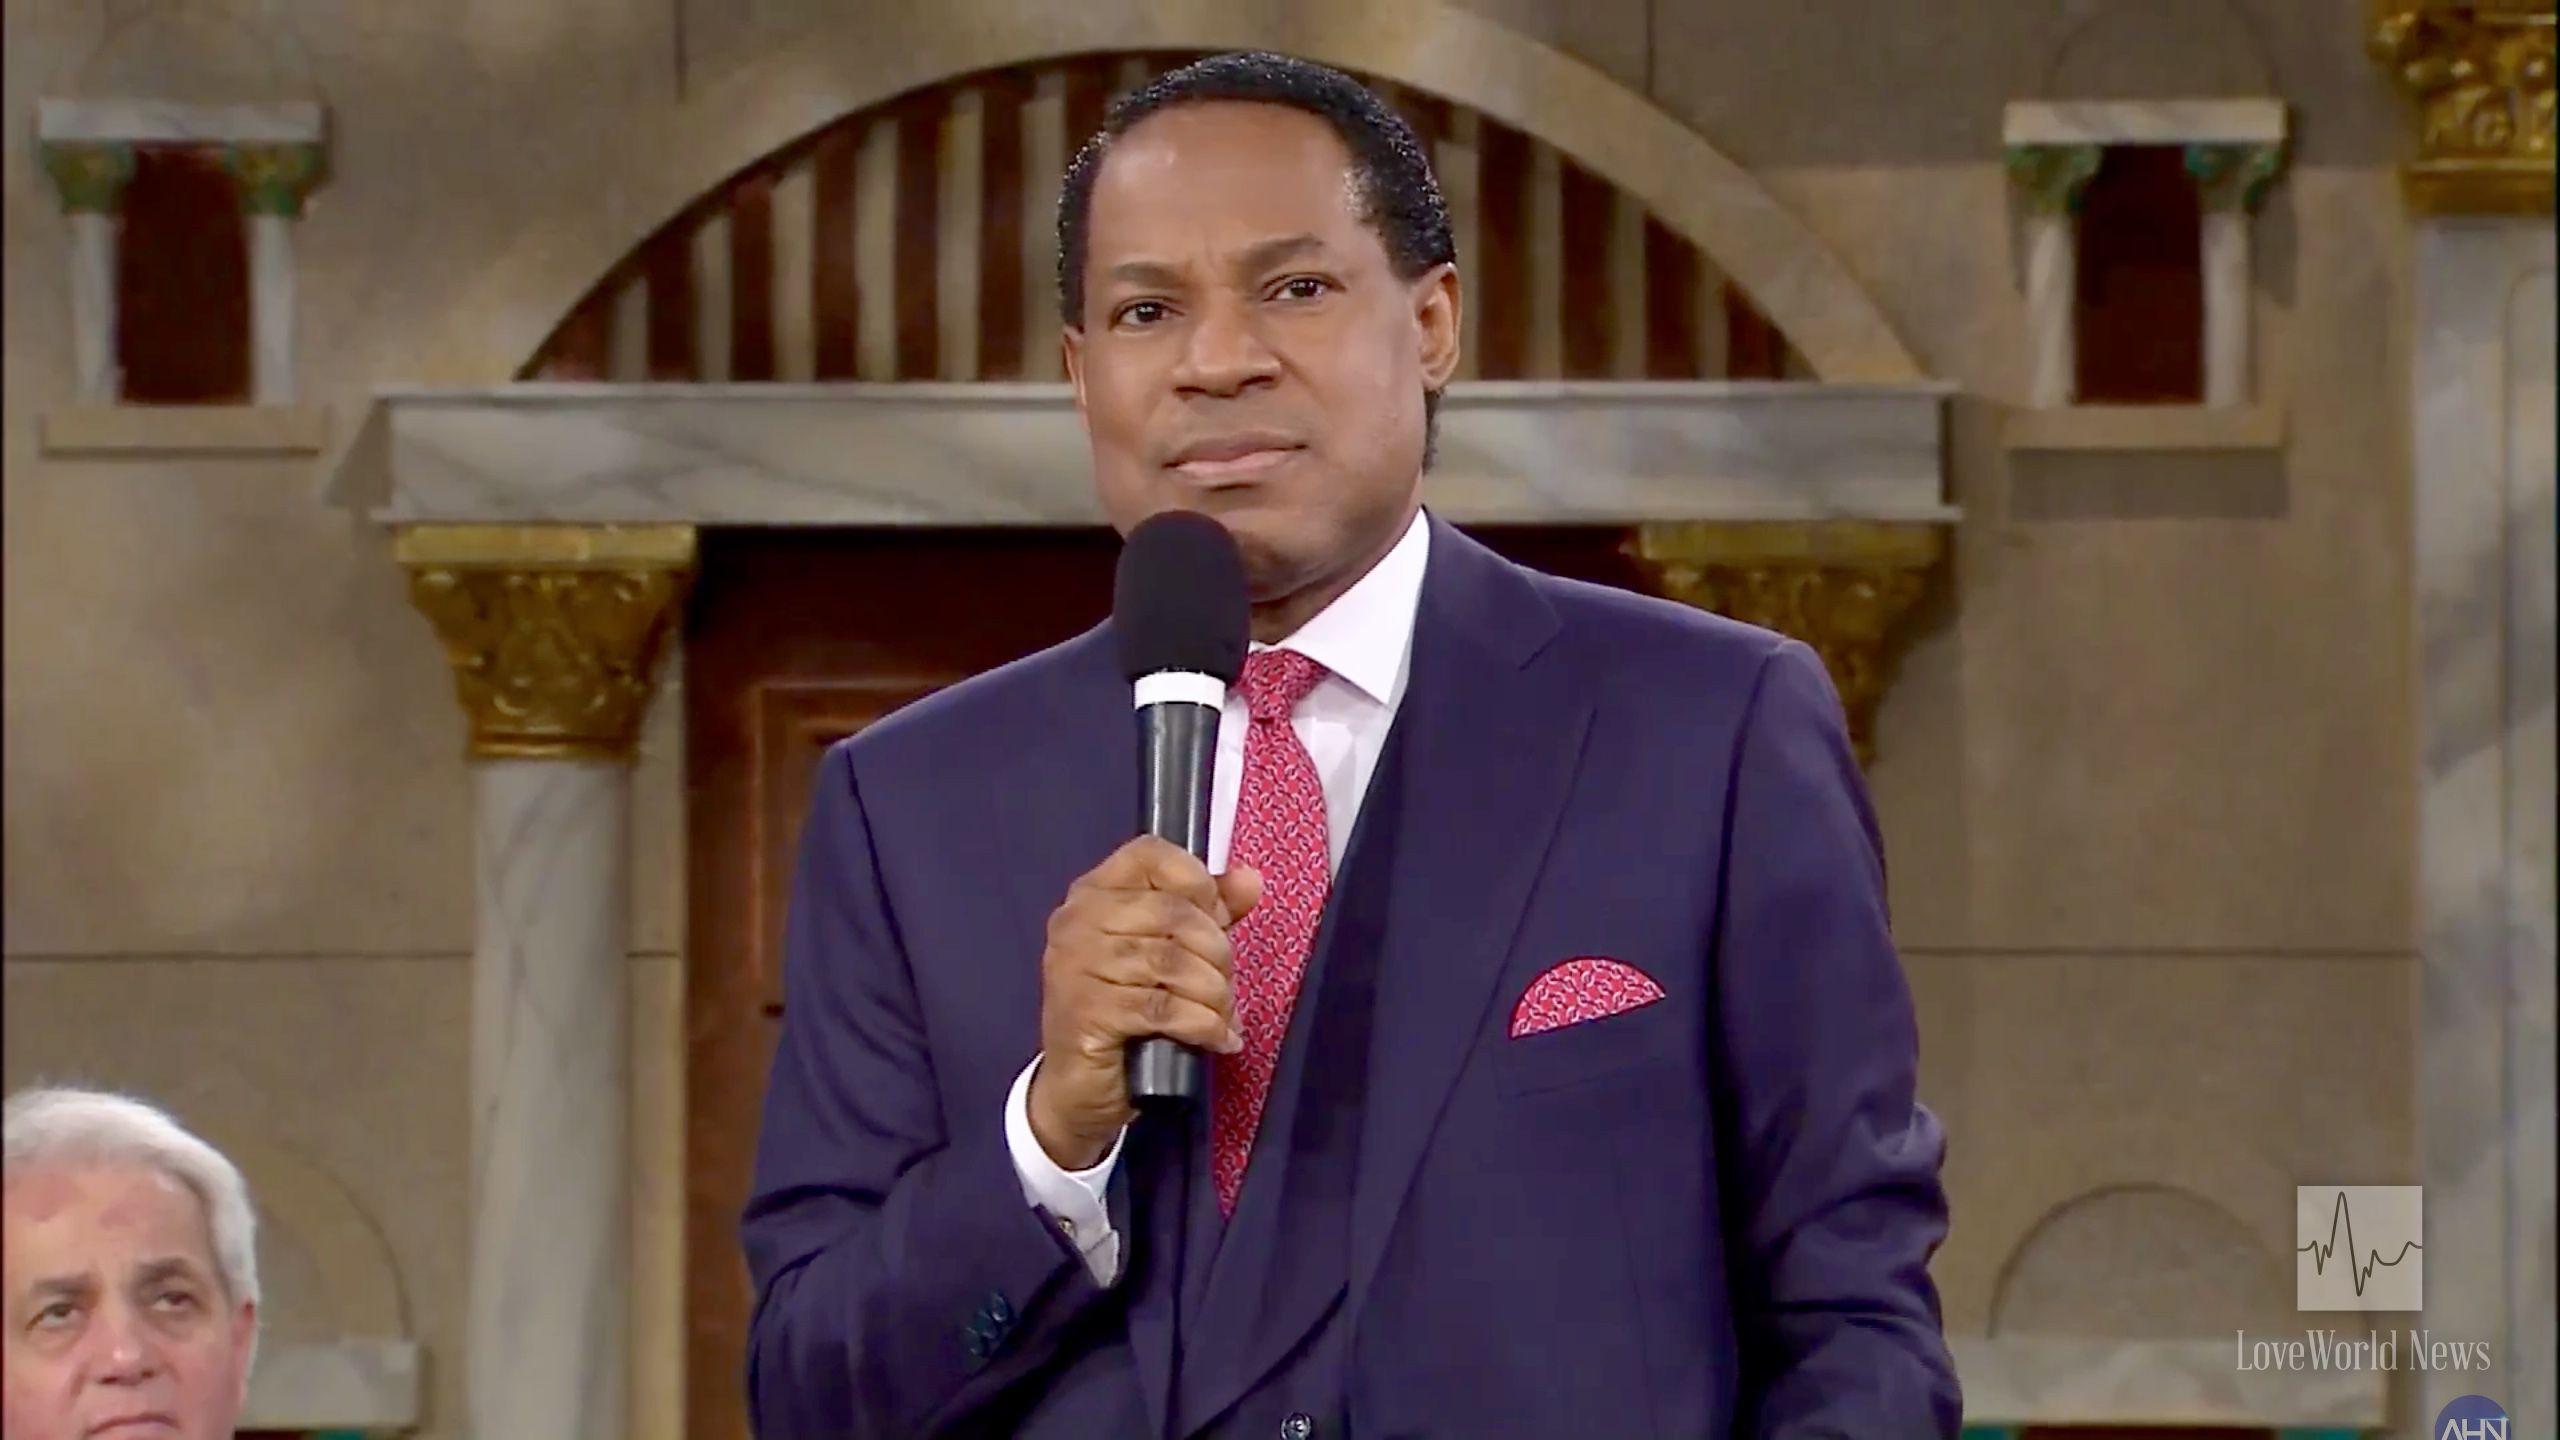 '5 Solid Facts of the Gospel' â€” Pastor Chris at Benny Hinn Ministries